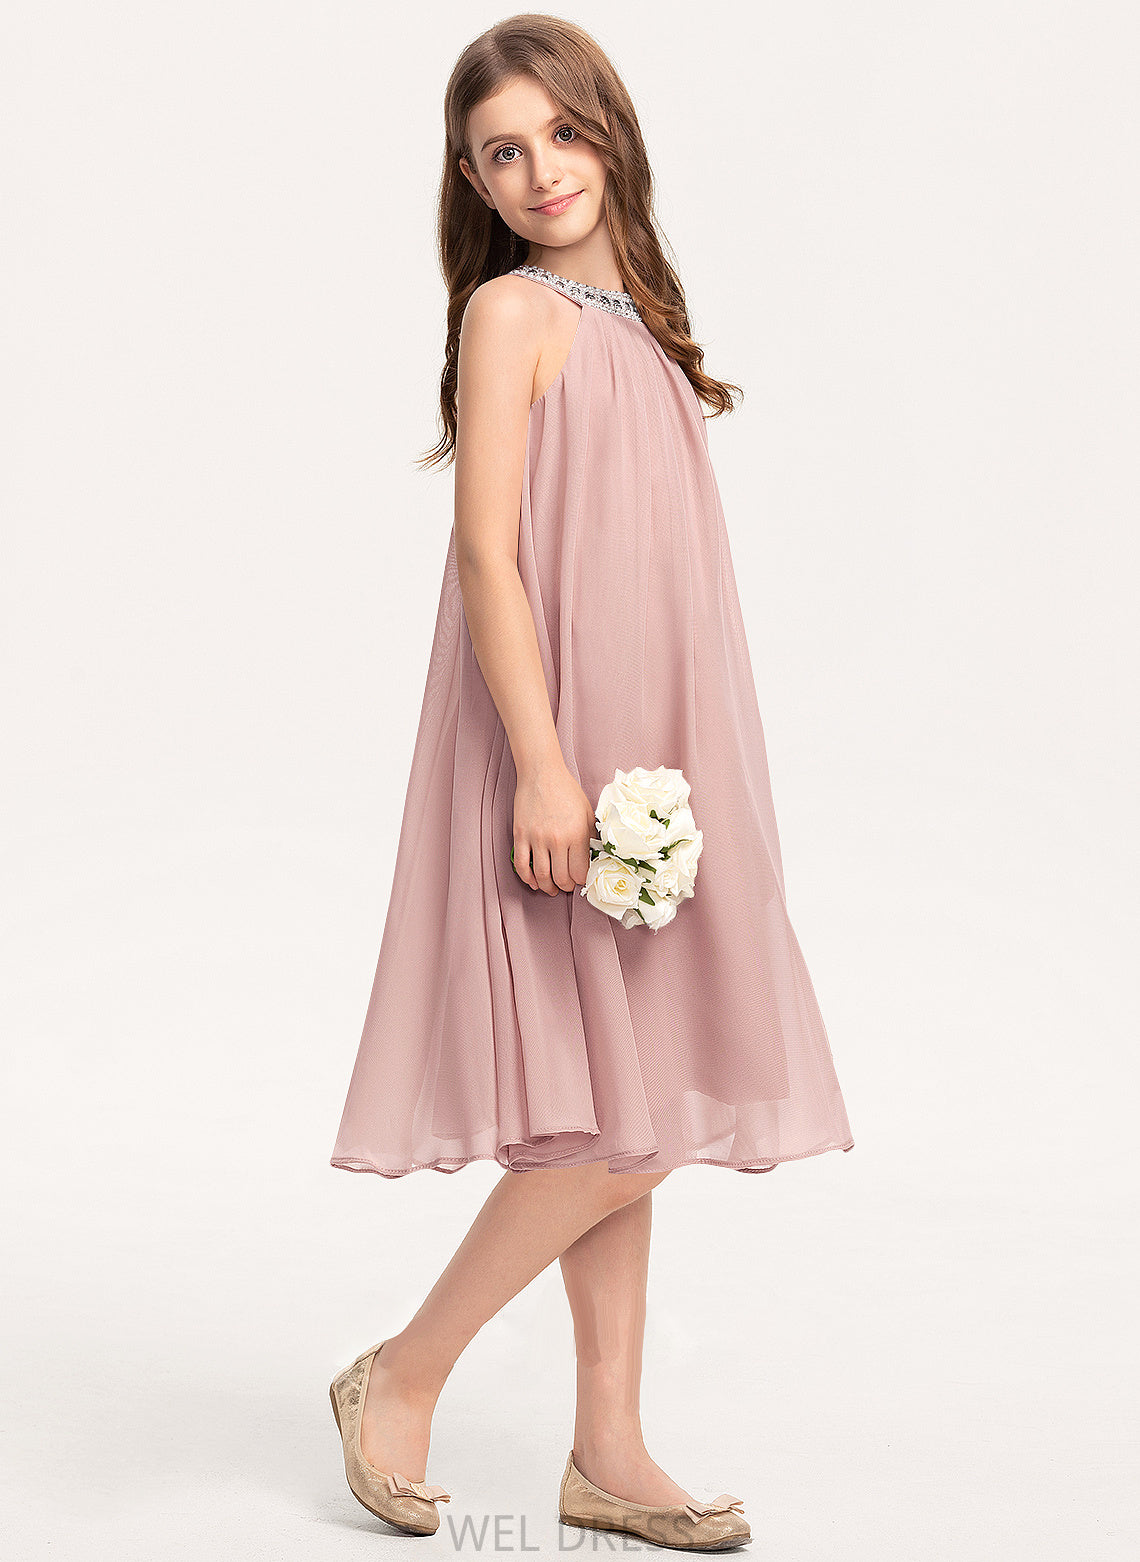 Junior Bridesmaid Dresses Knee-Length Madalyn With A-Line Neck Beading Scoop Sequins Chiffon